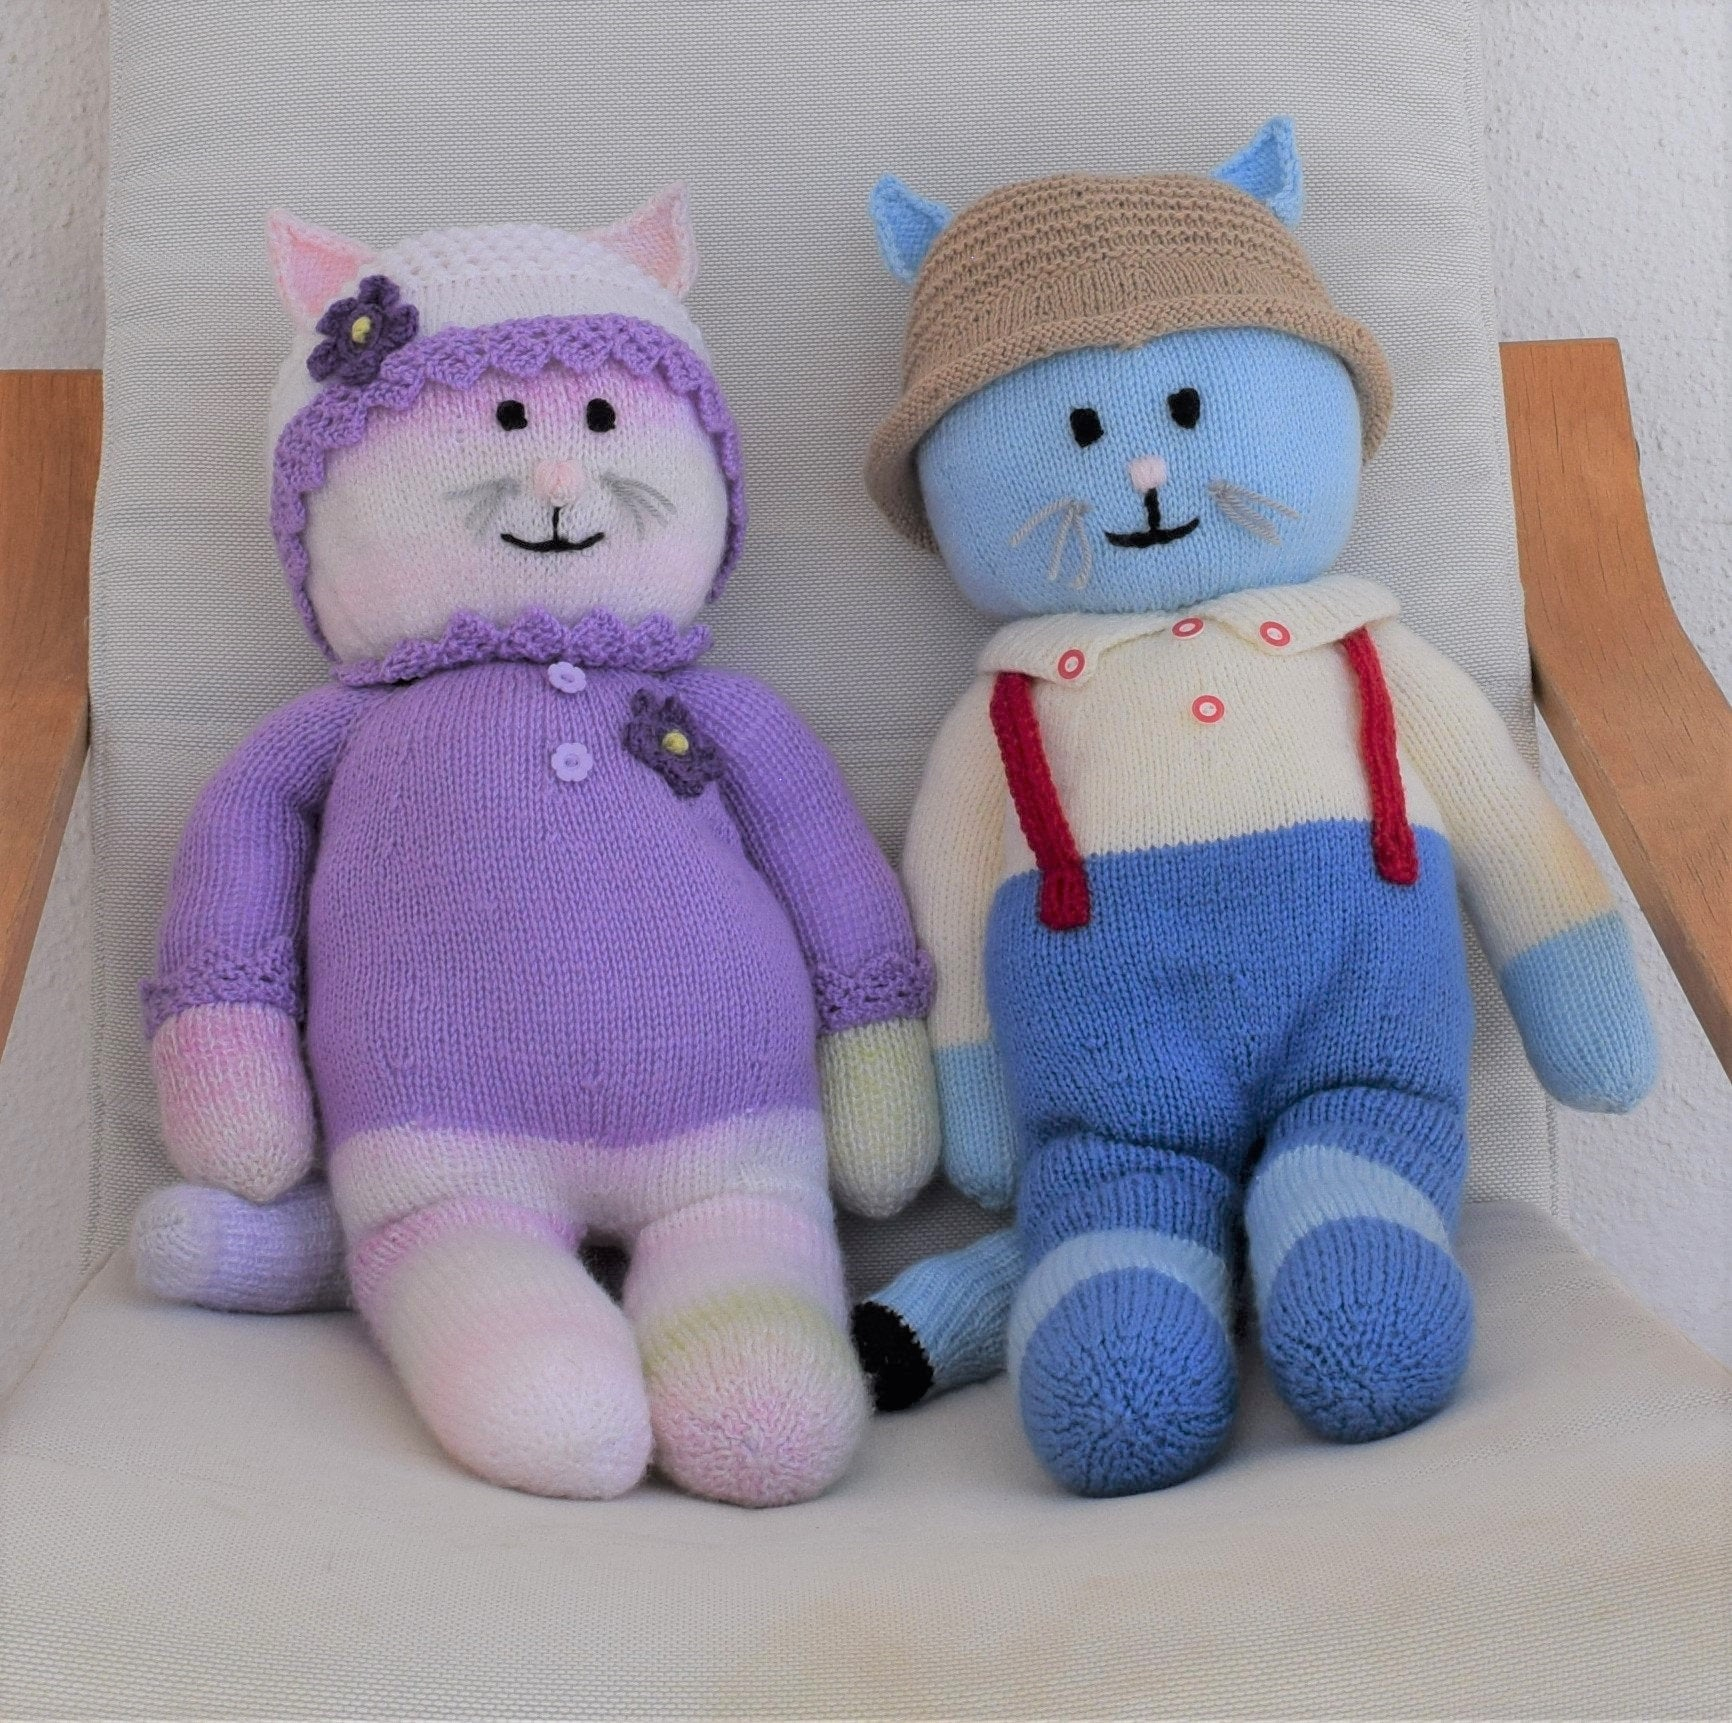 Knitting Patterns For Baby Toys Boy And Girl Cat Knitting Pattern Knitted Animal Toys Handmade